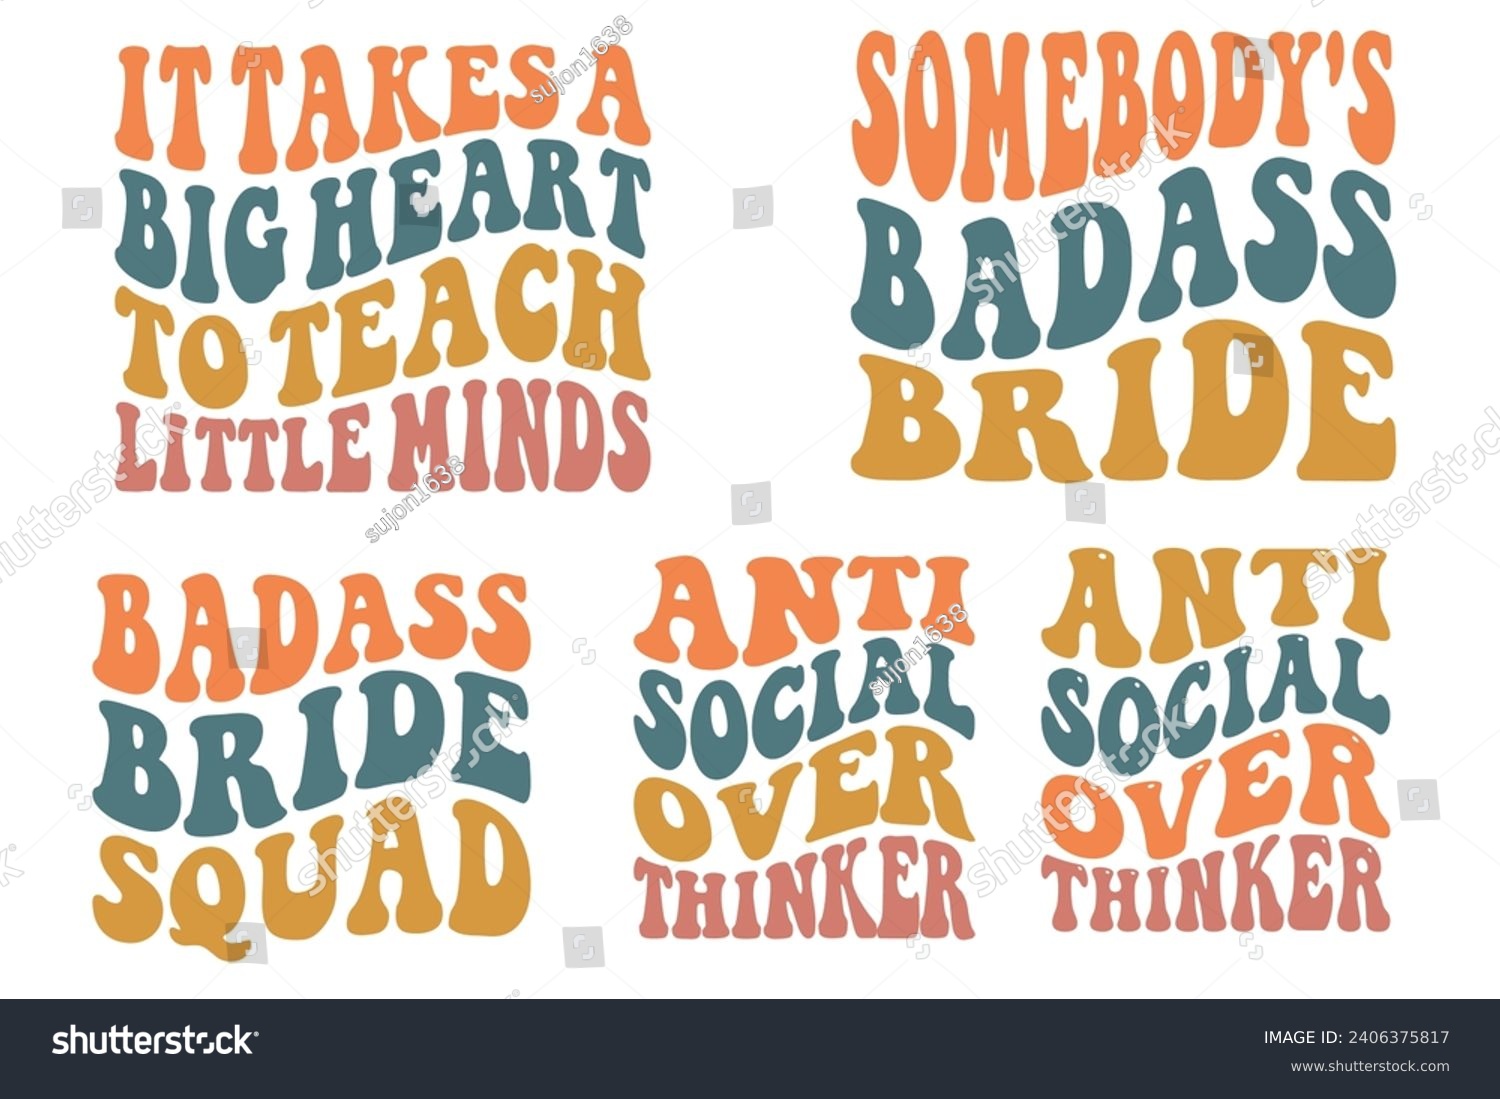 SVG of  It Takes A Big Heart To Teach Little Minds, Somebody's Badass Bride, Badass Bride Squad, Antisocial Overthinker retro T-shirt designs svg